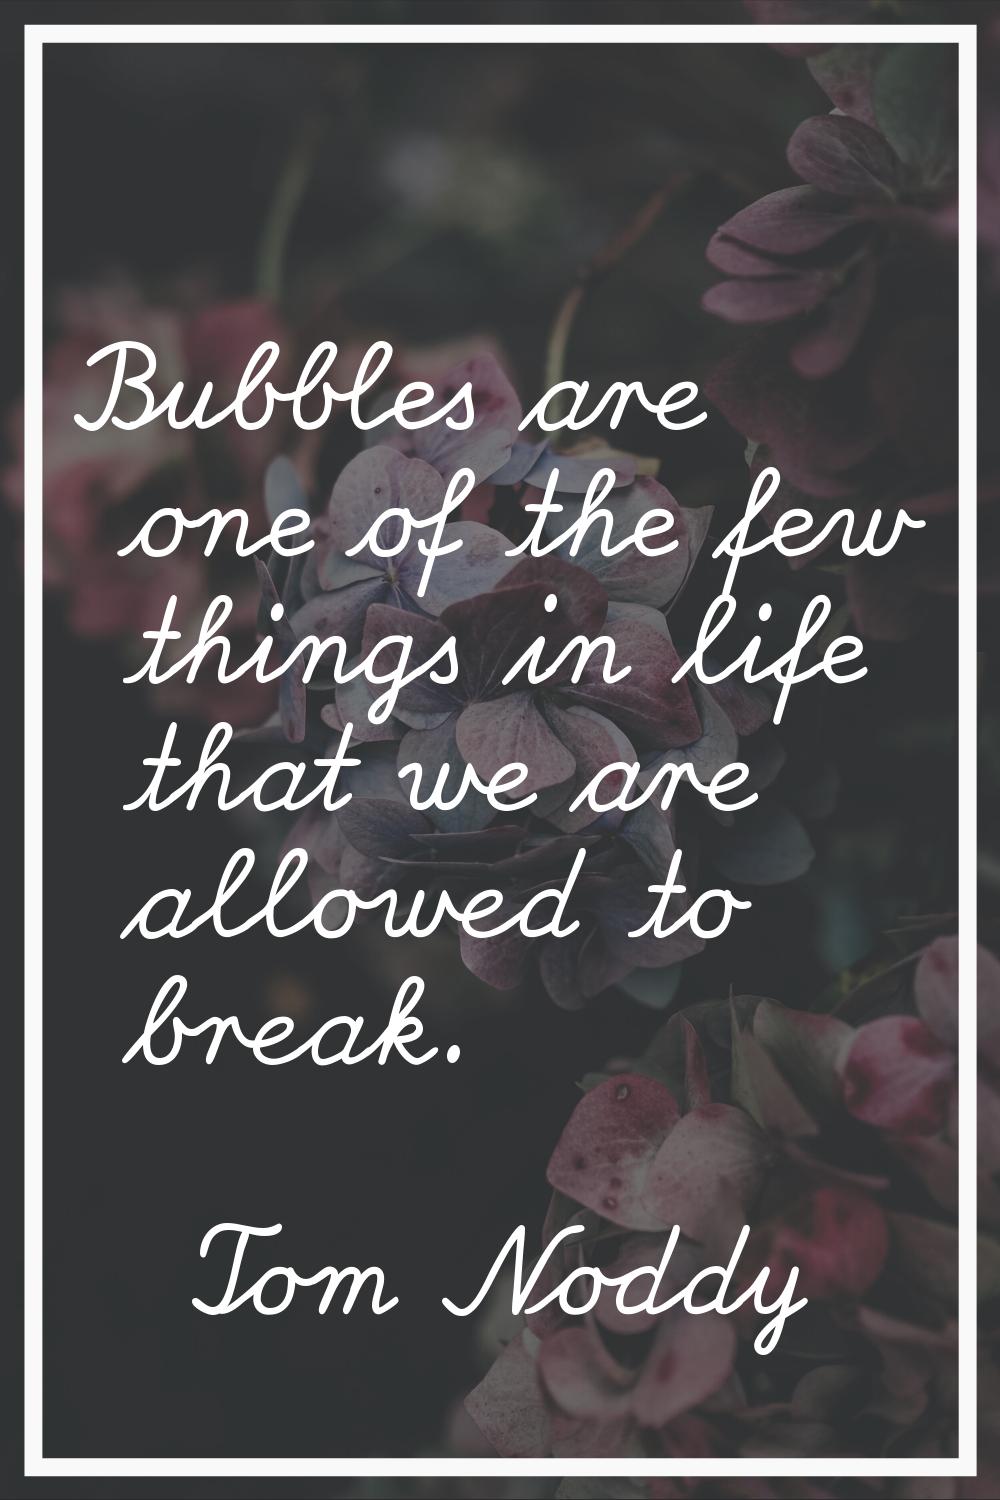 Bubbles are one of the few things in life that we are allowed to break.